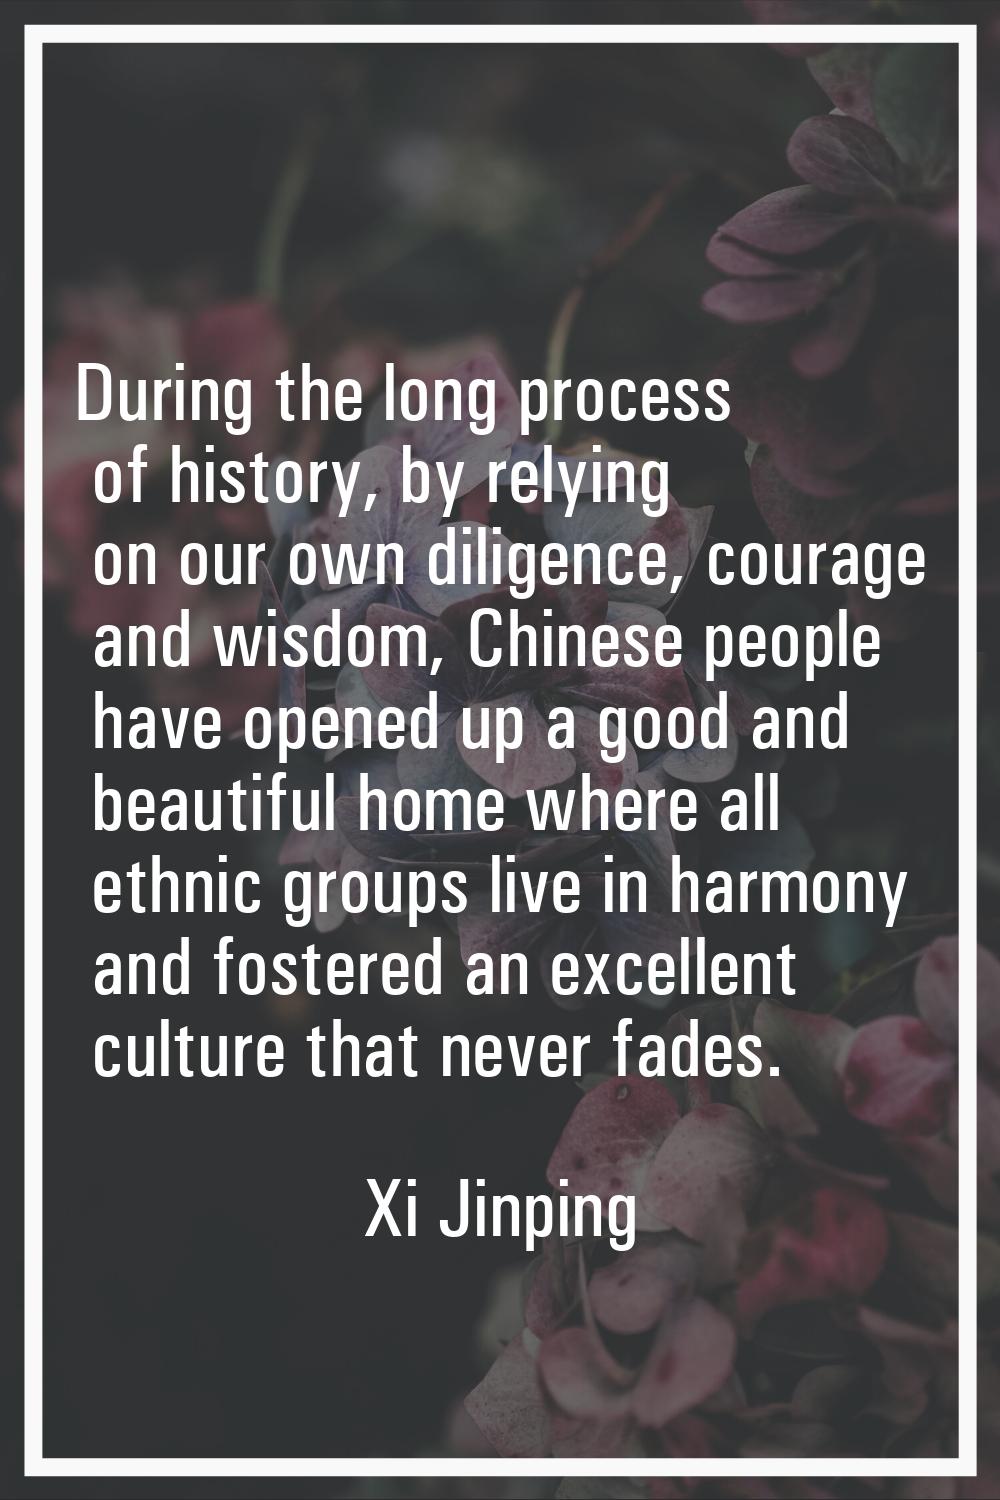 During the long process of history, by relying on our own diligence, courage and wisdom, Chinese pe